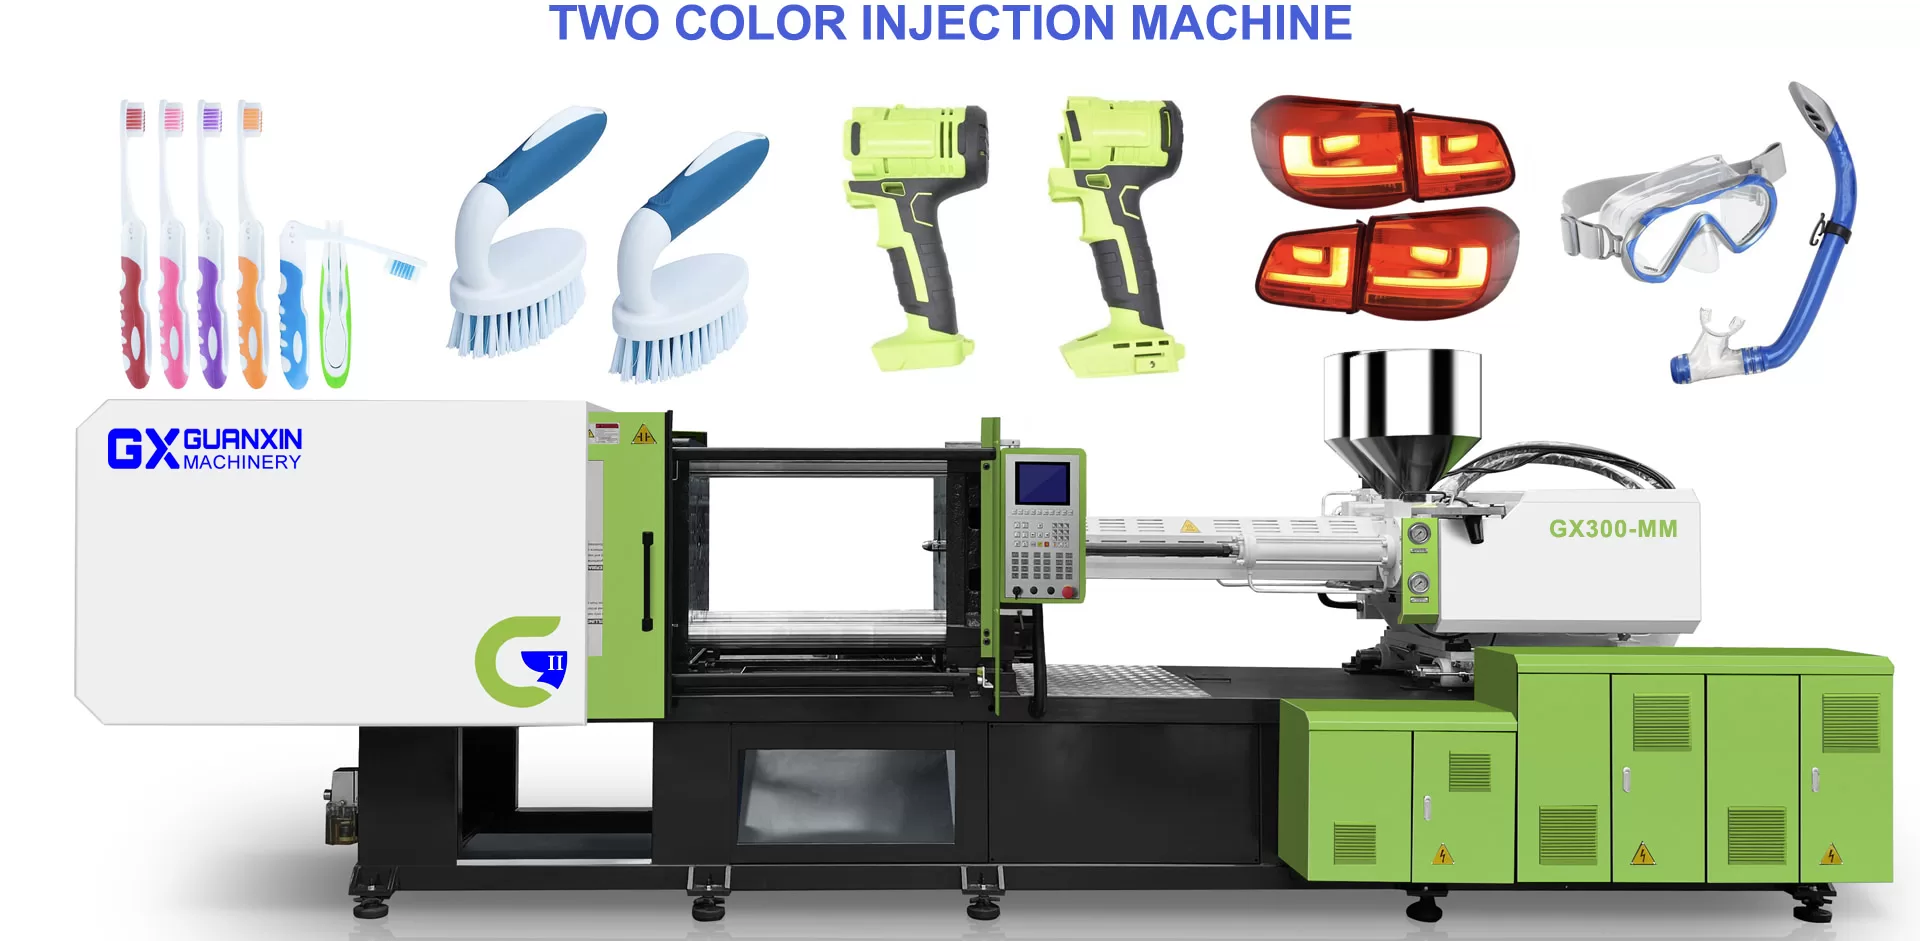 Two-Color-two-shot-multi-material-Injection-Molding-Machine-Manufacturer-Supplier-China